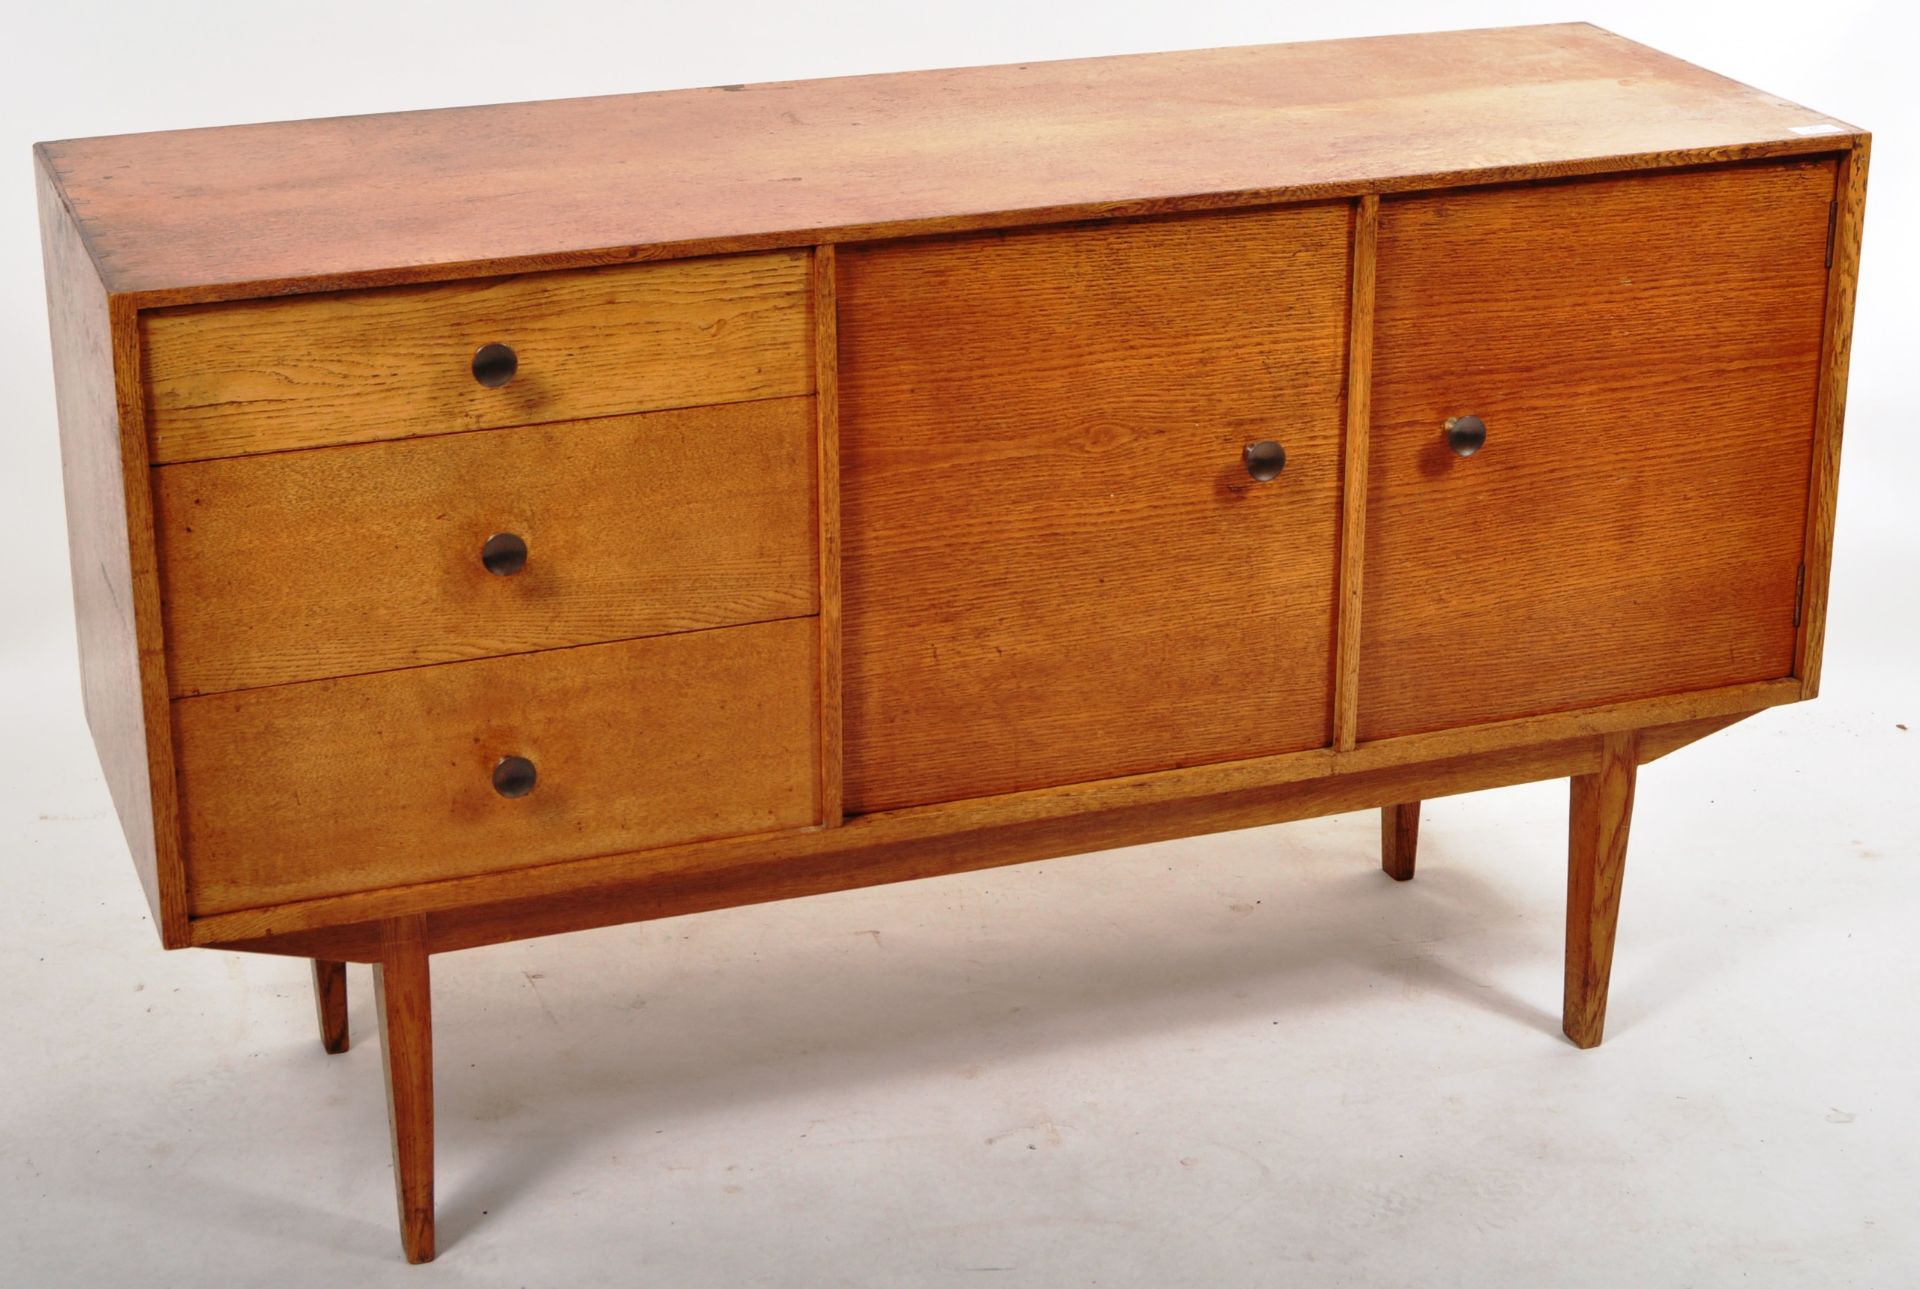 RETRO VINTAGE GORDON RUSSELL MANNER 1950'S SIDEBOARD - Image 2 of 9